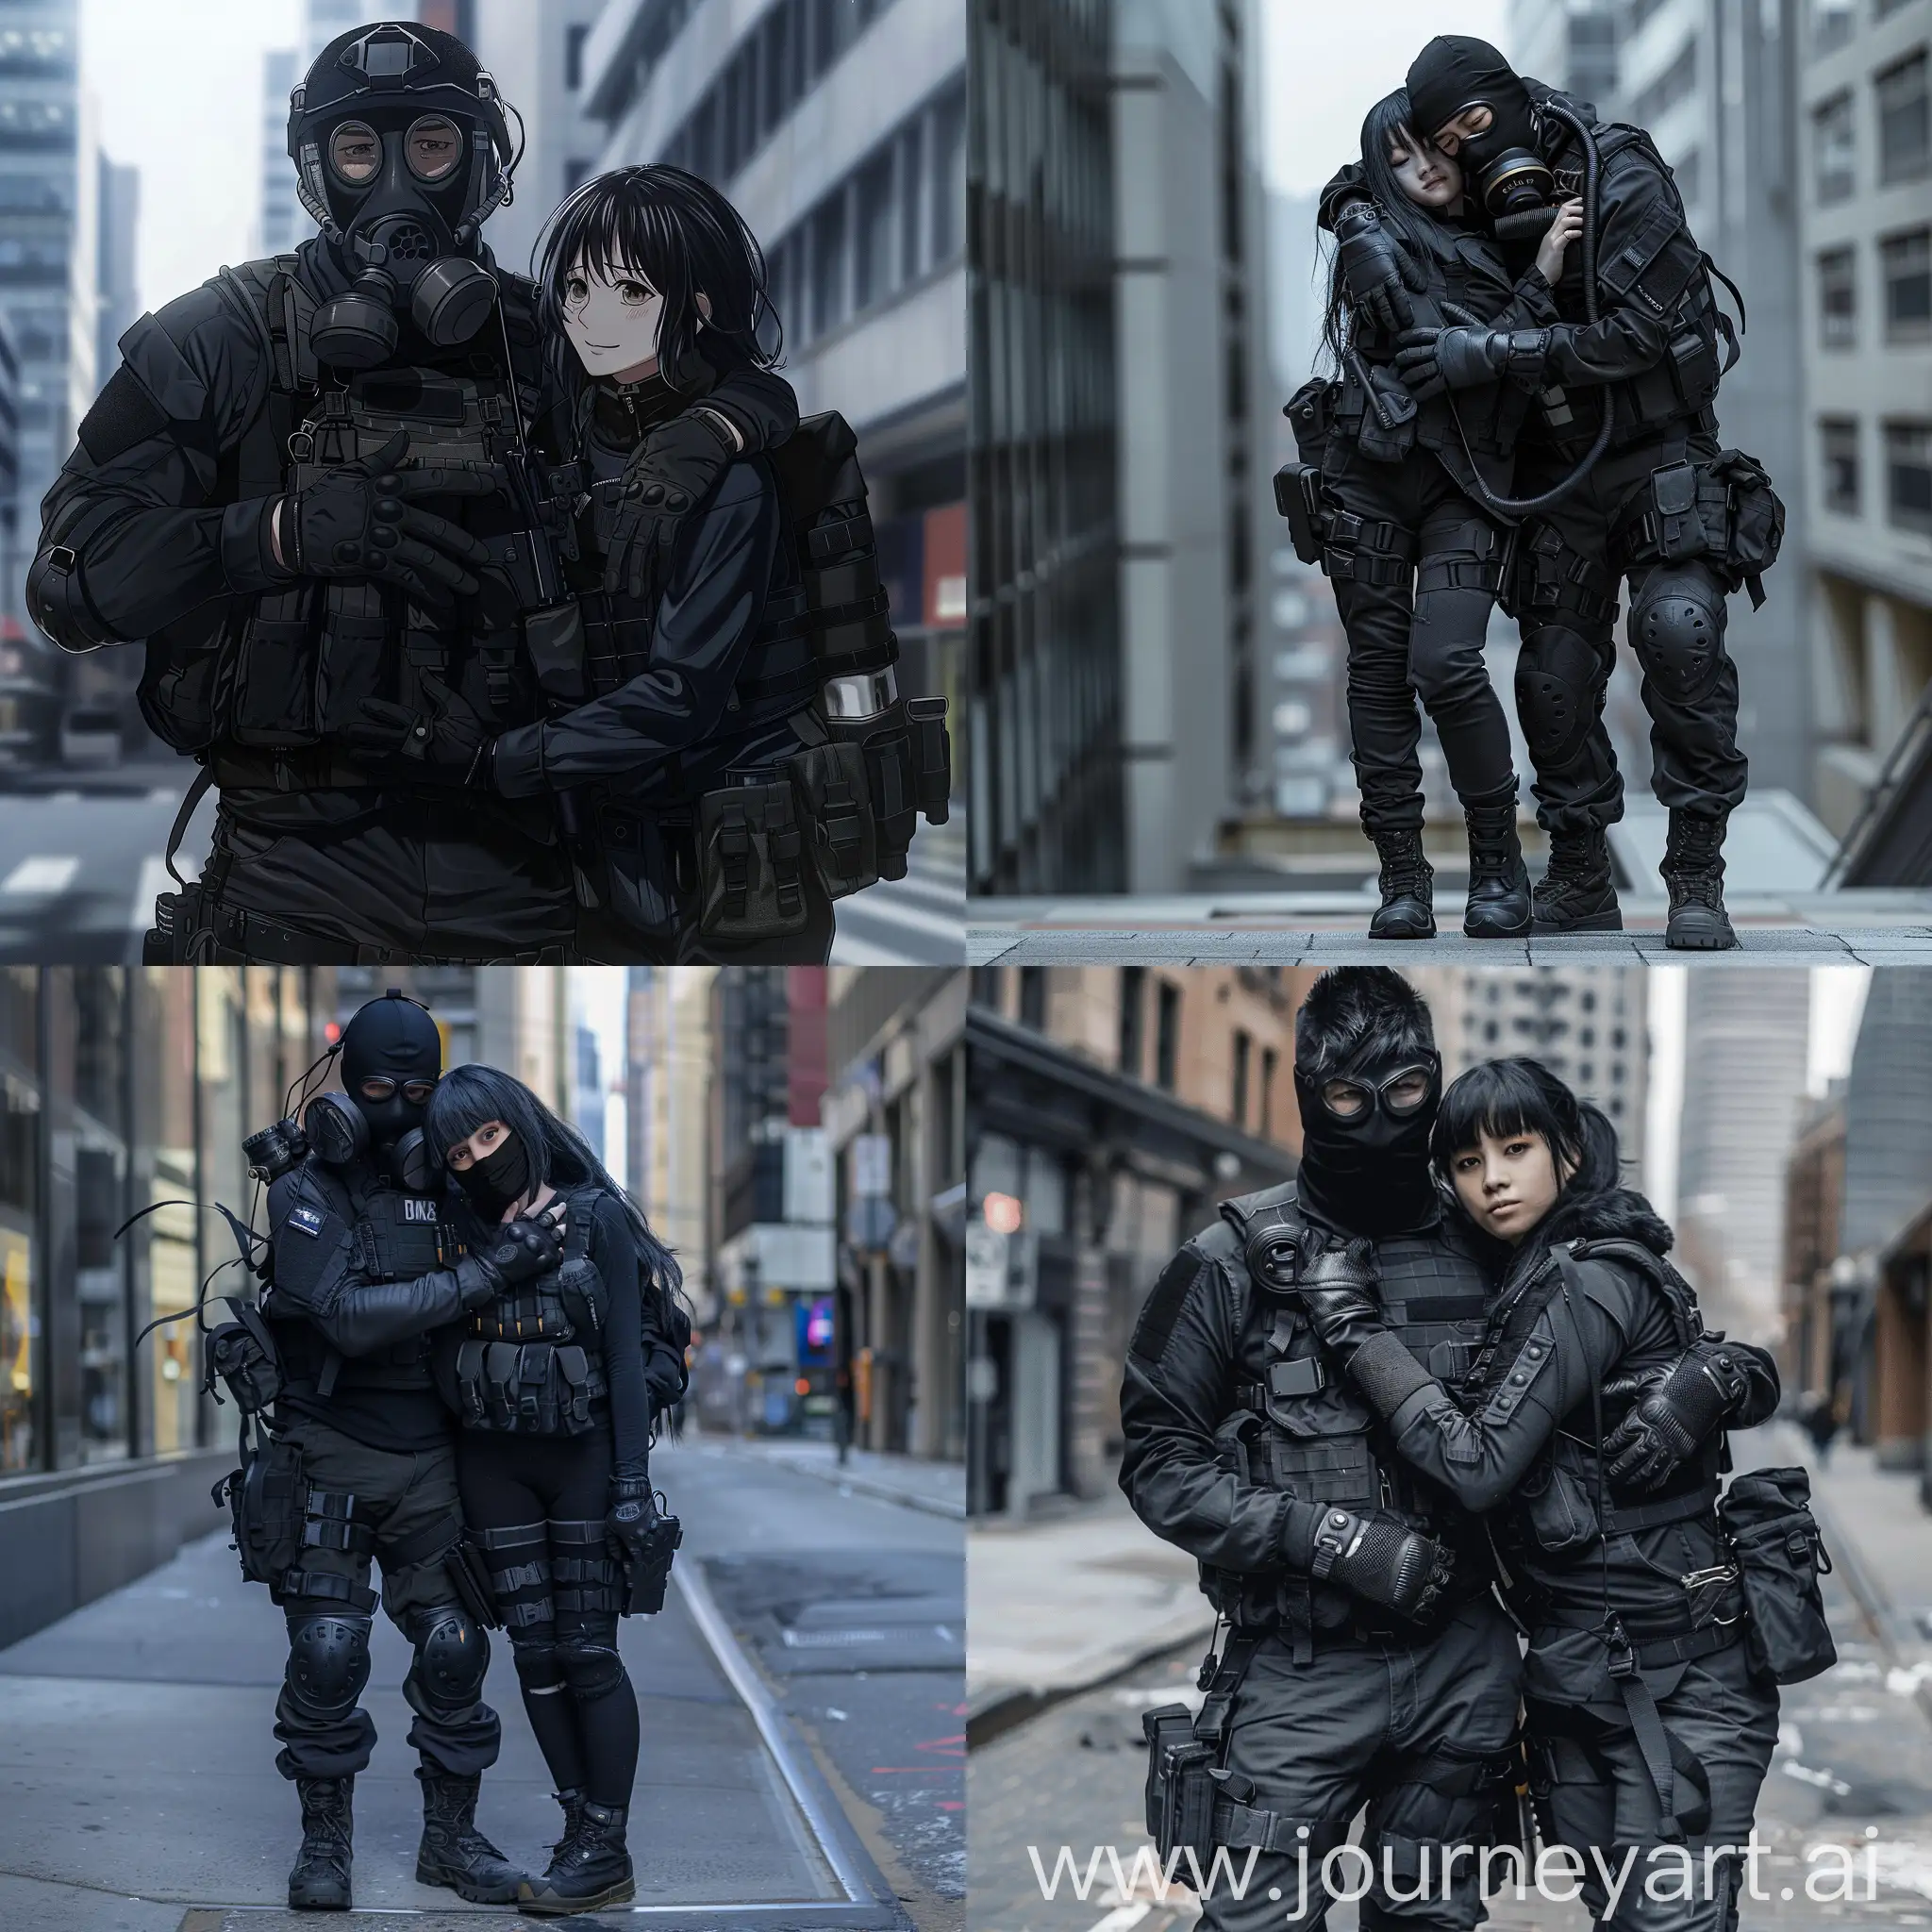 Urban-Stealth-Man-and-Girl-in-Black-Tactical-Gear-Embrace-in-the-City